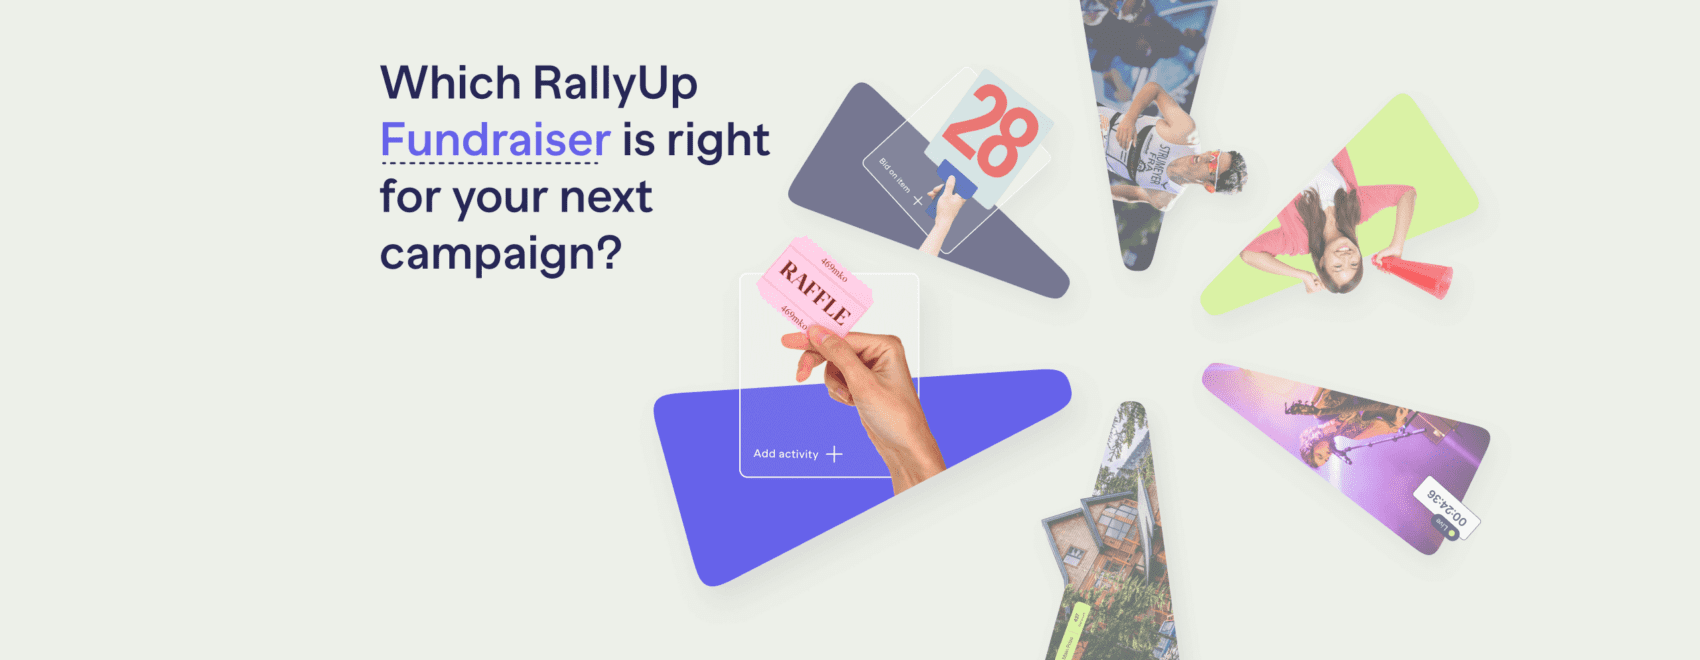 Which RallyUp fundraiser is right for your next campaign